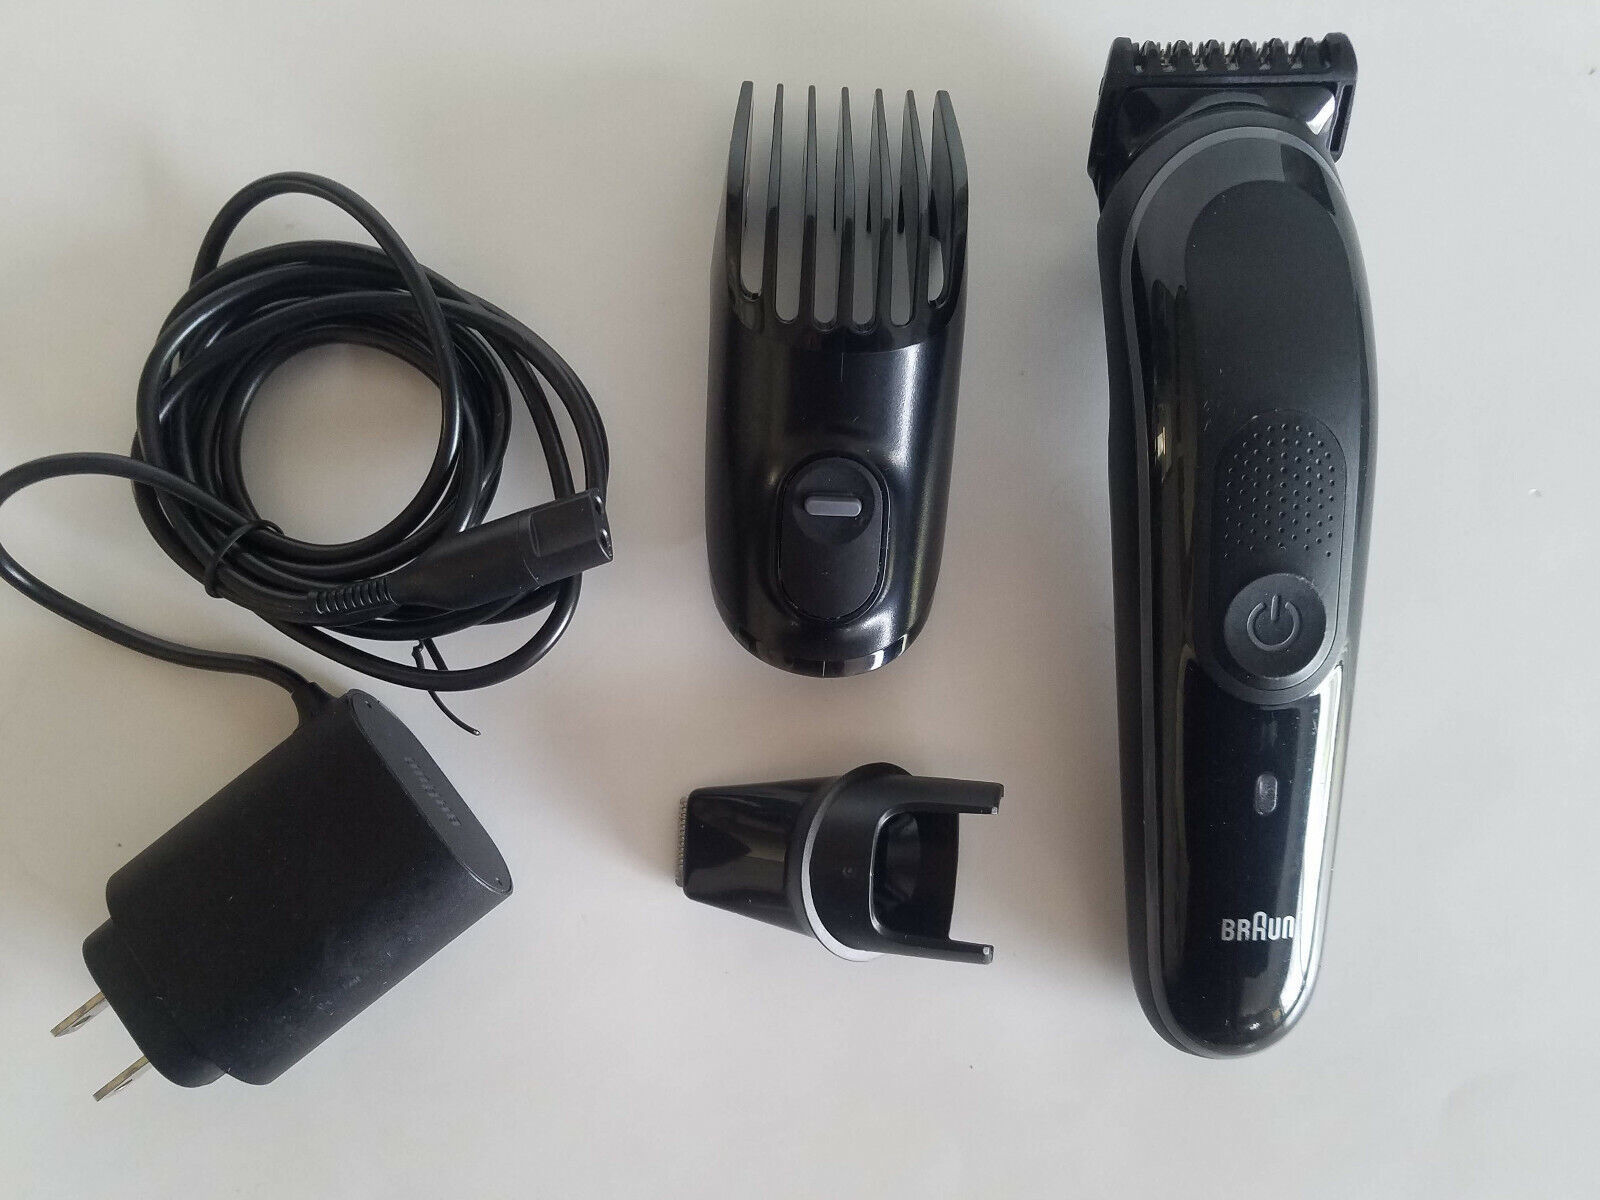 Primary image for Braun Trimmer MGK3260